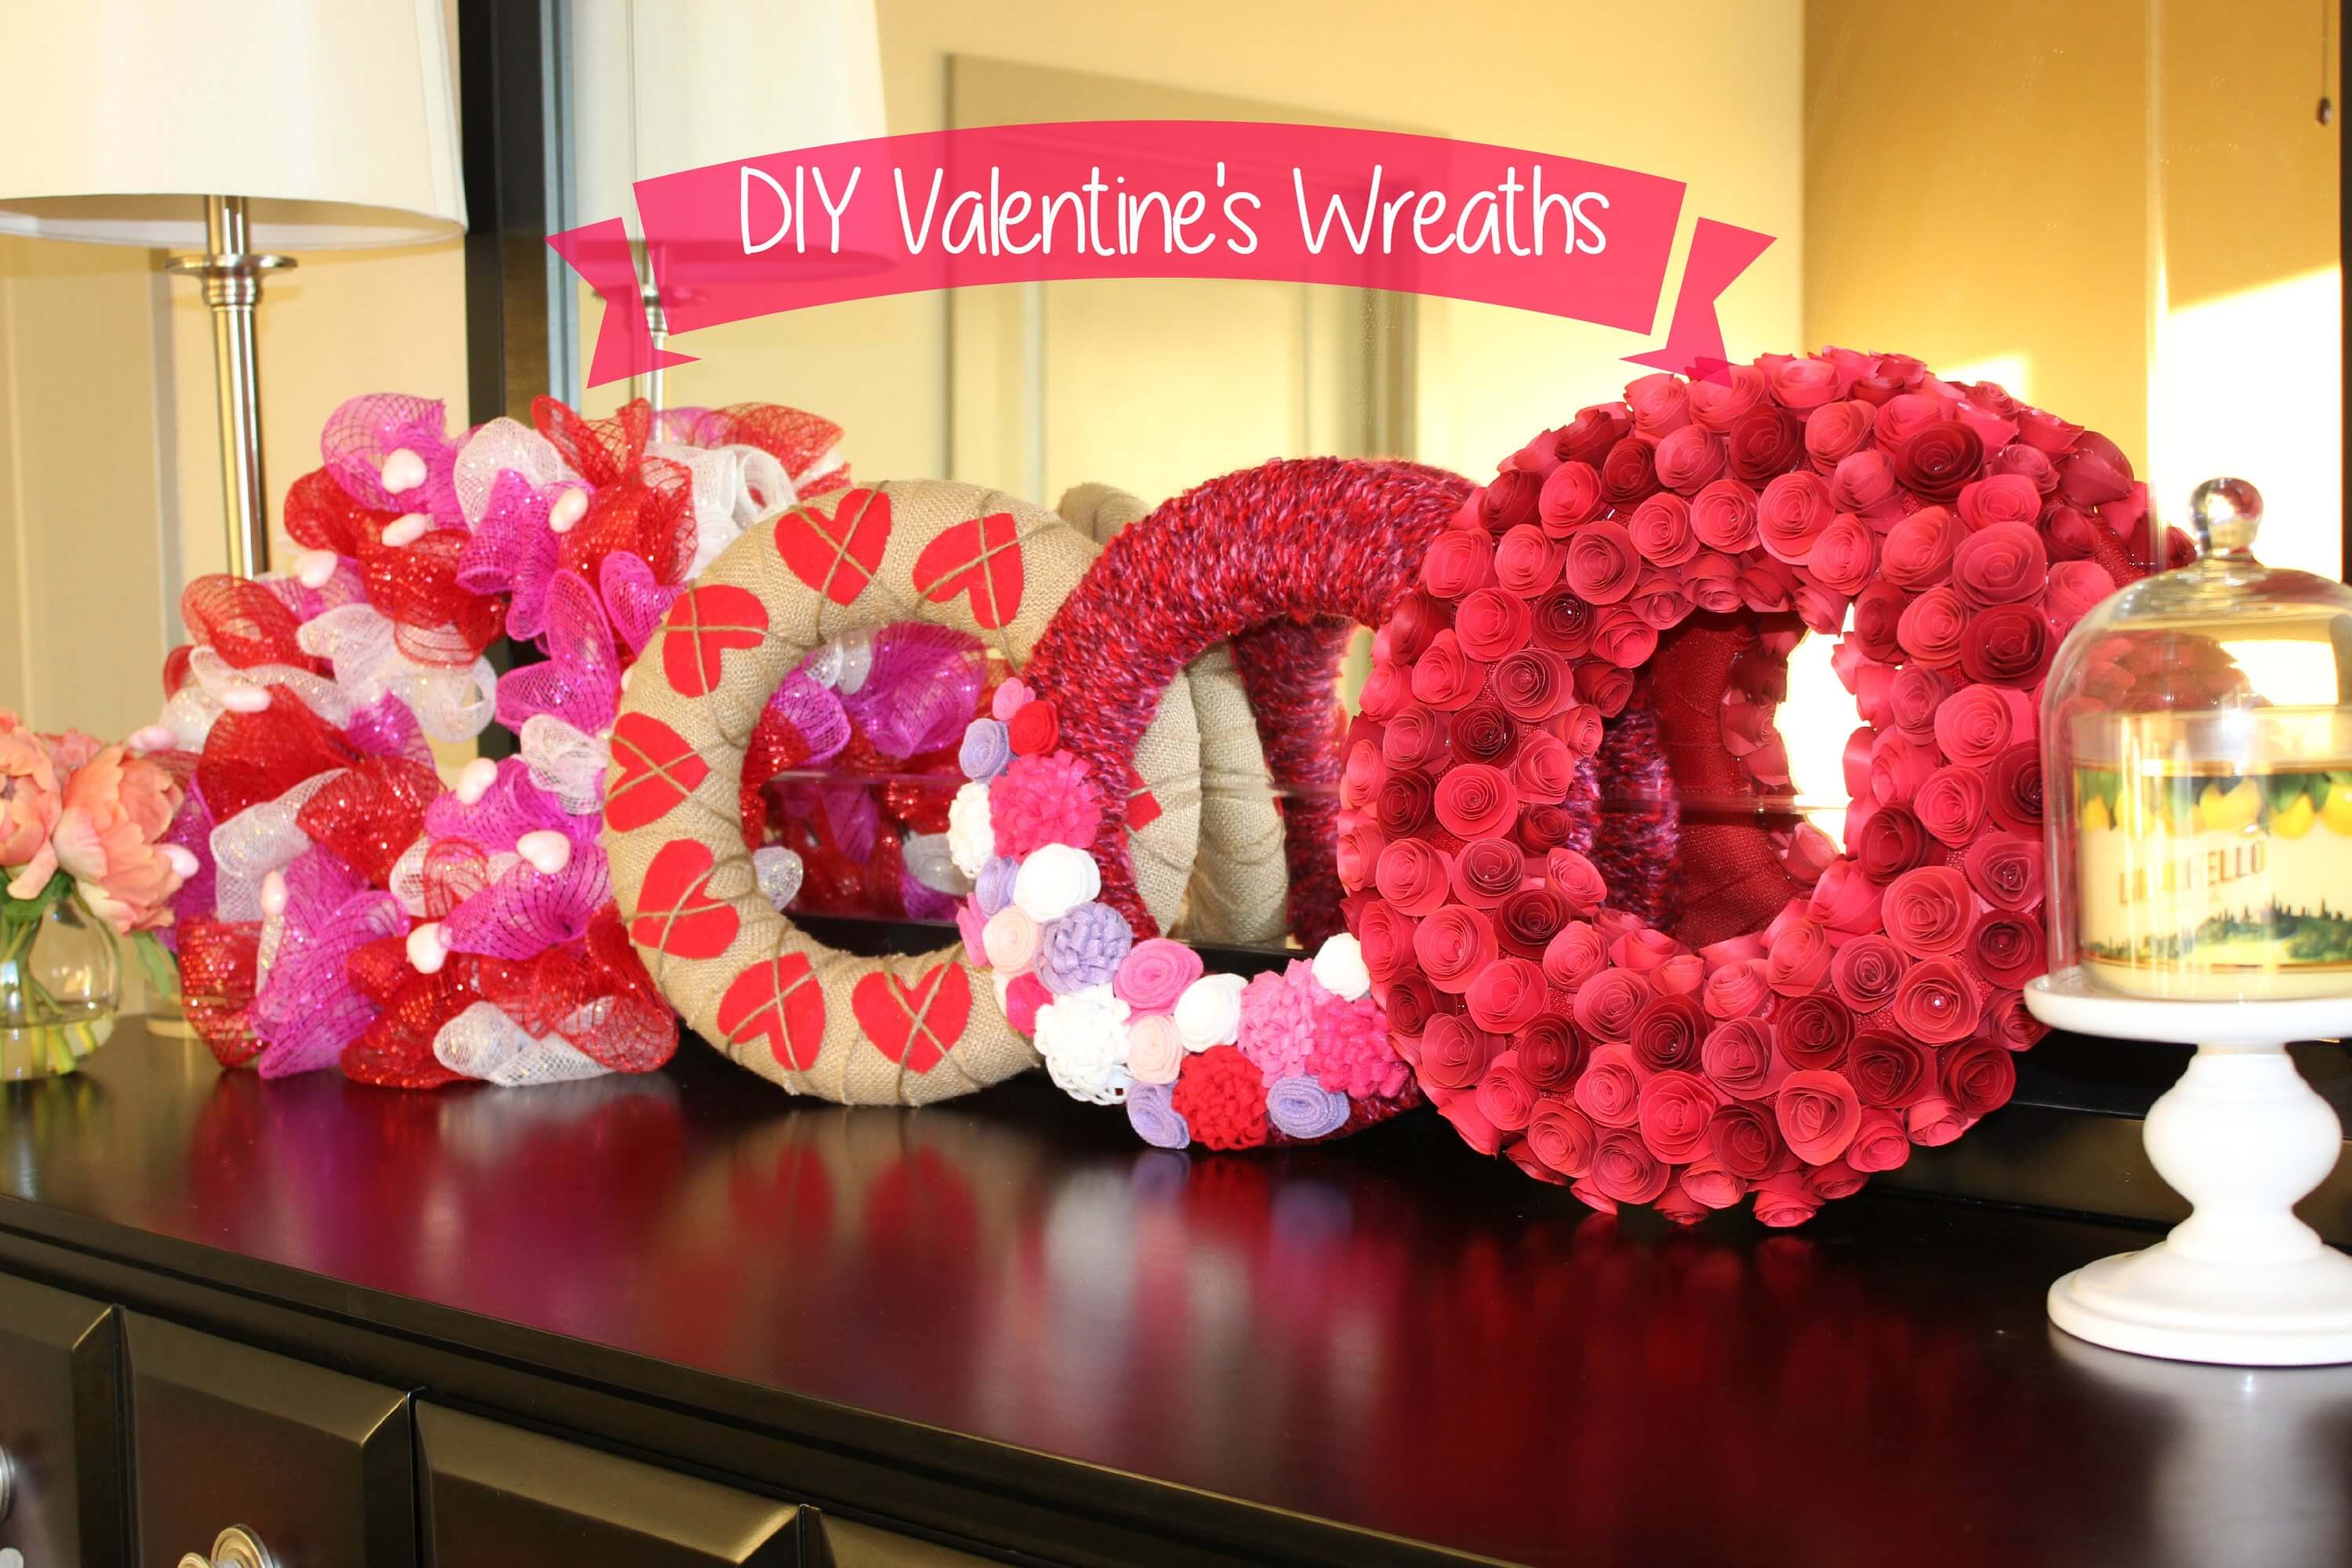 A wooden table topped with lots of valentine's wreaths
